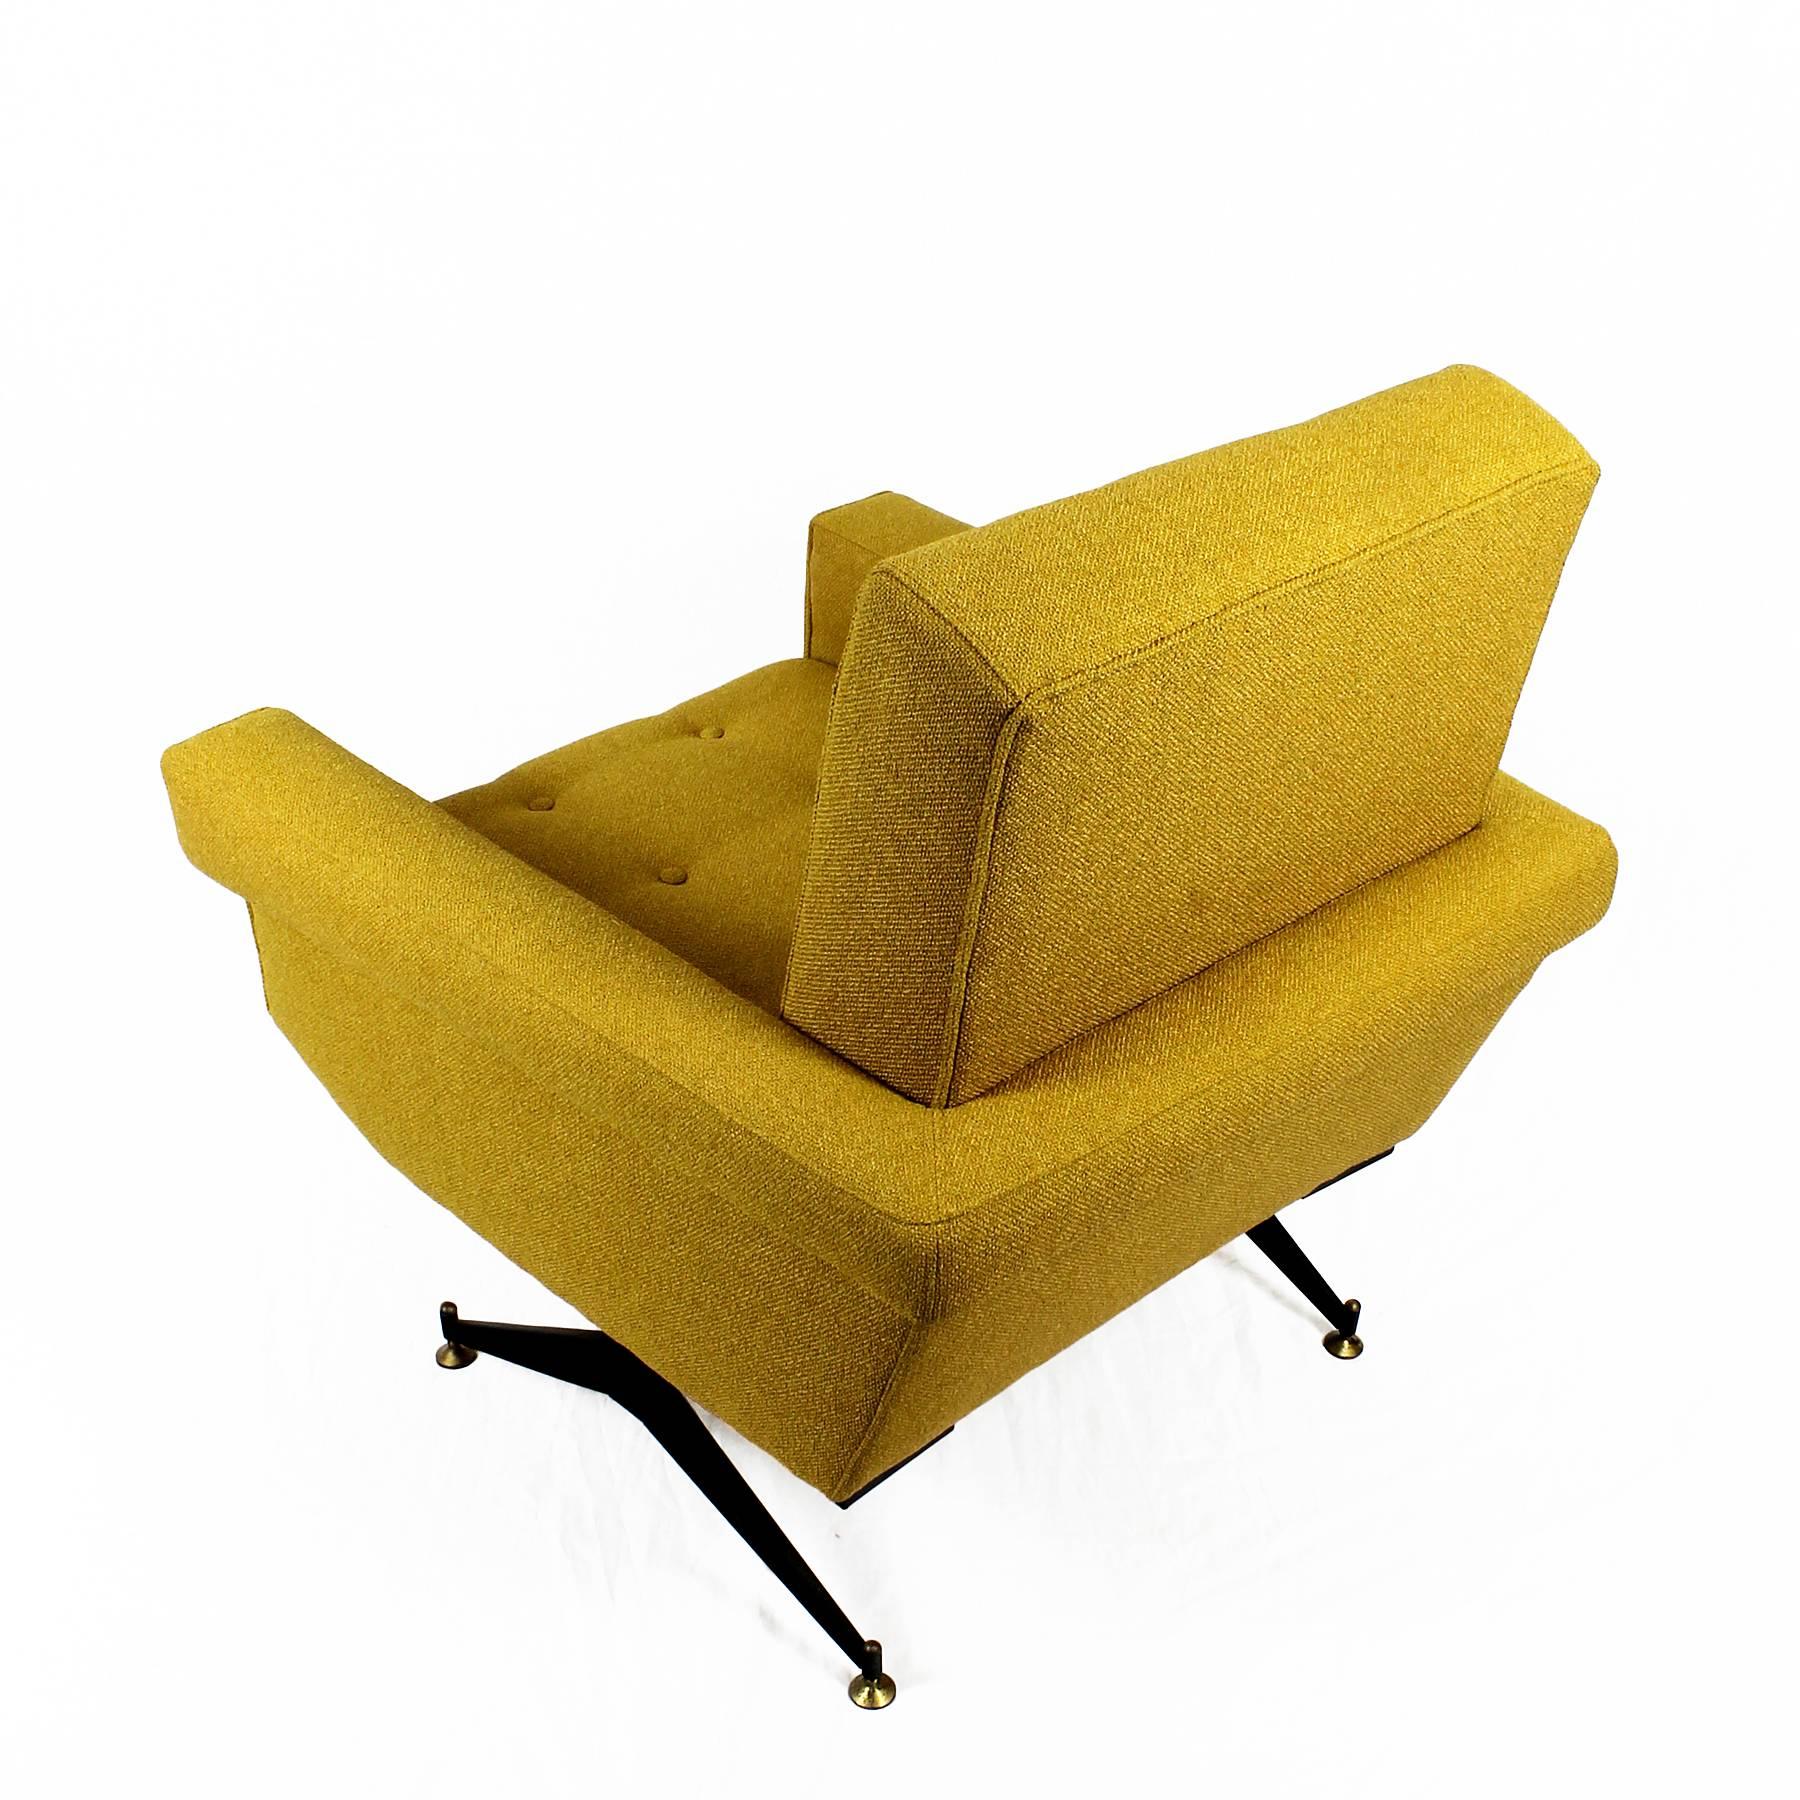 1960s Pair of Padded Armchairs, Yellow and Black, Steel, Upholstery, Italy 1